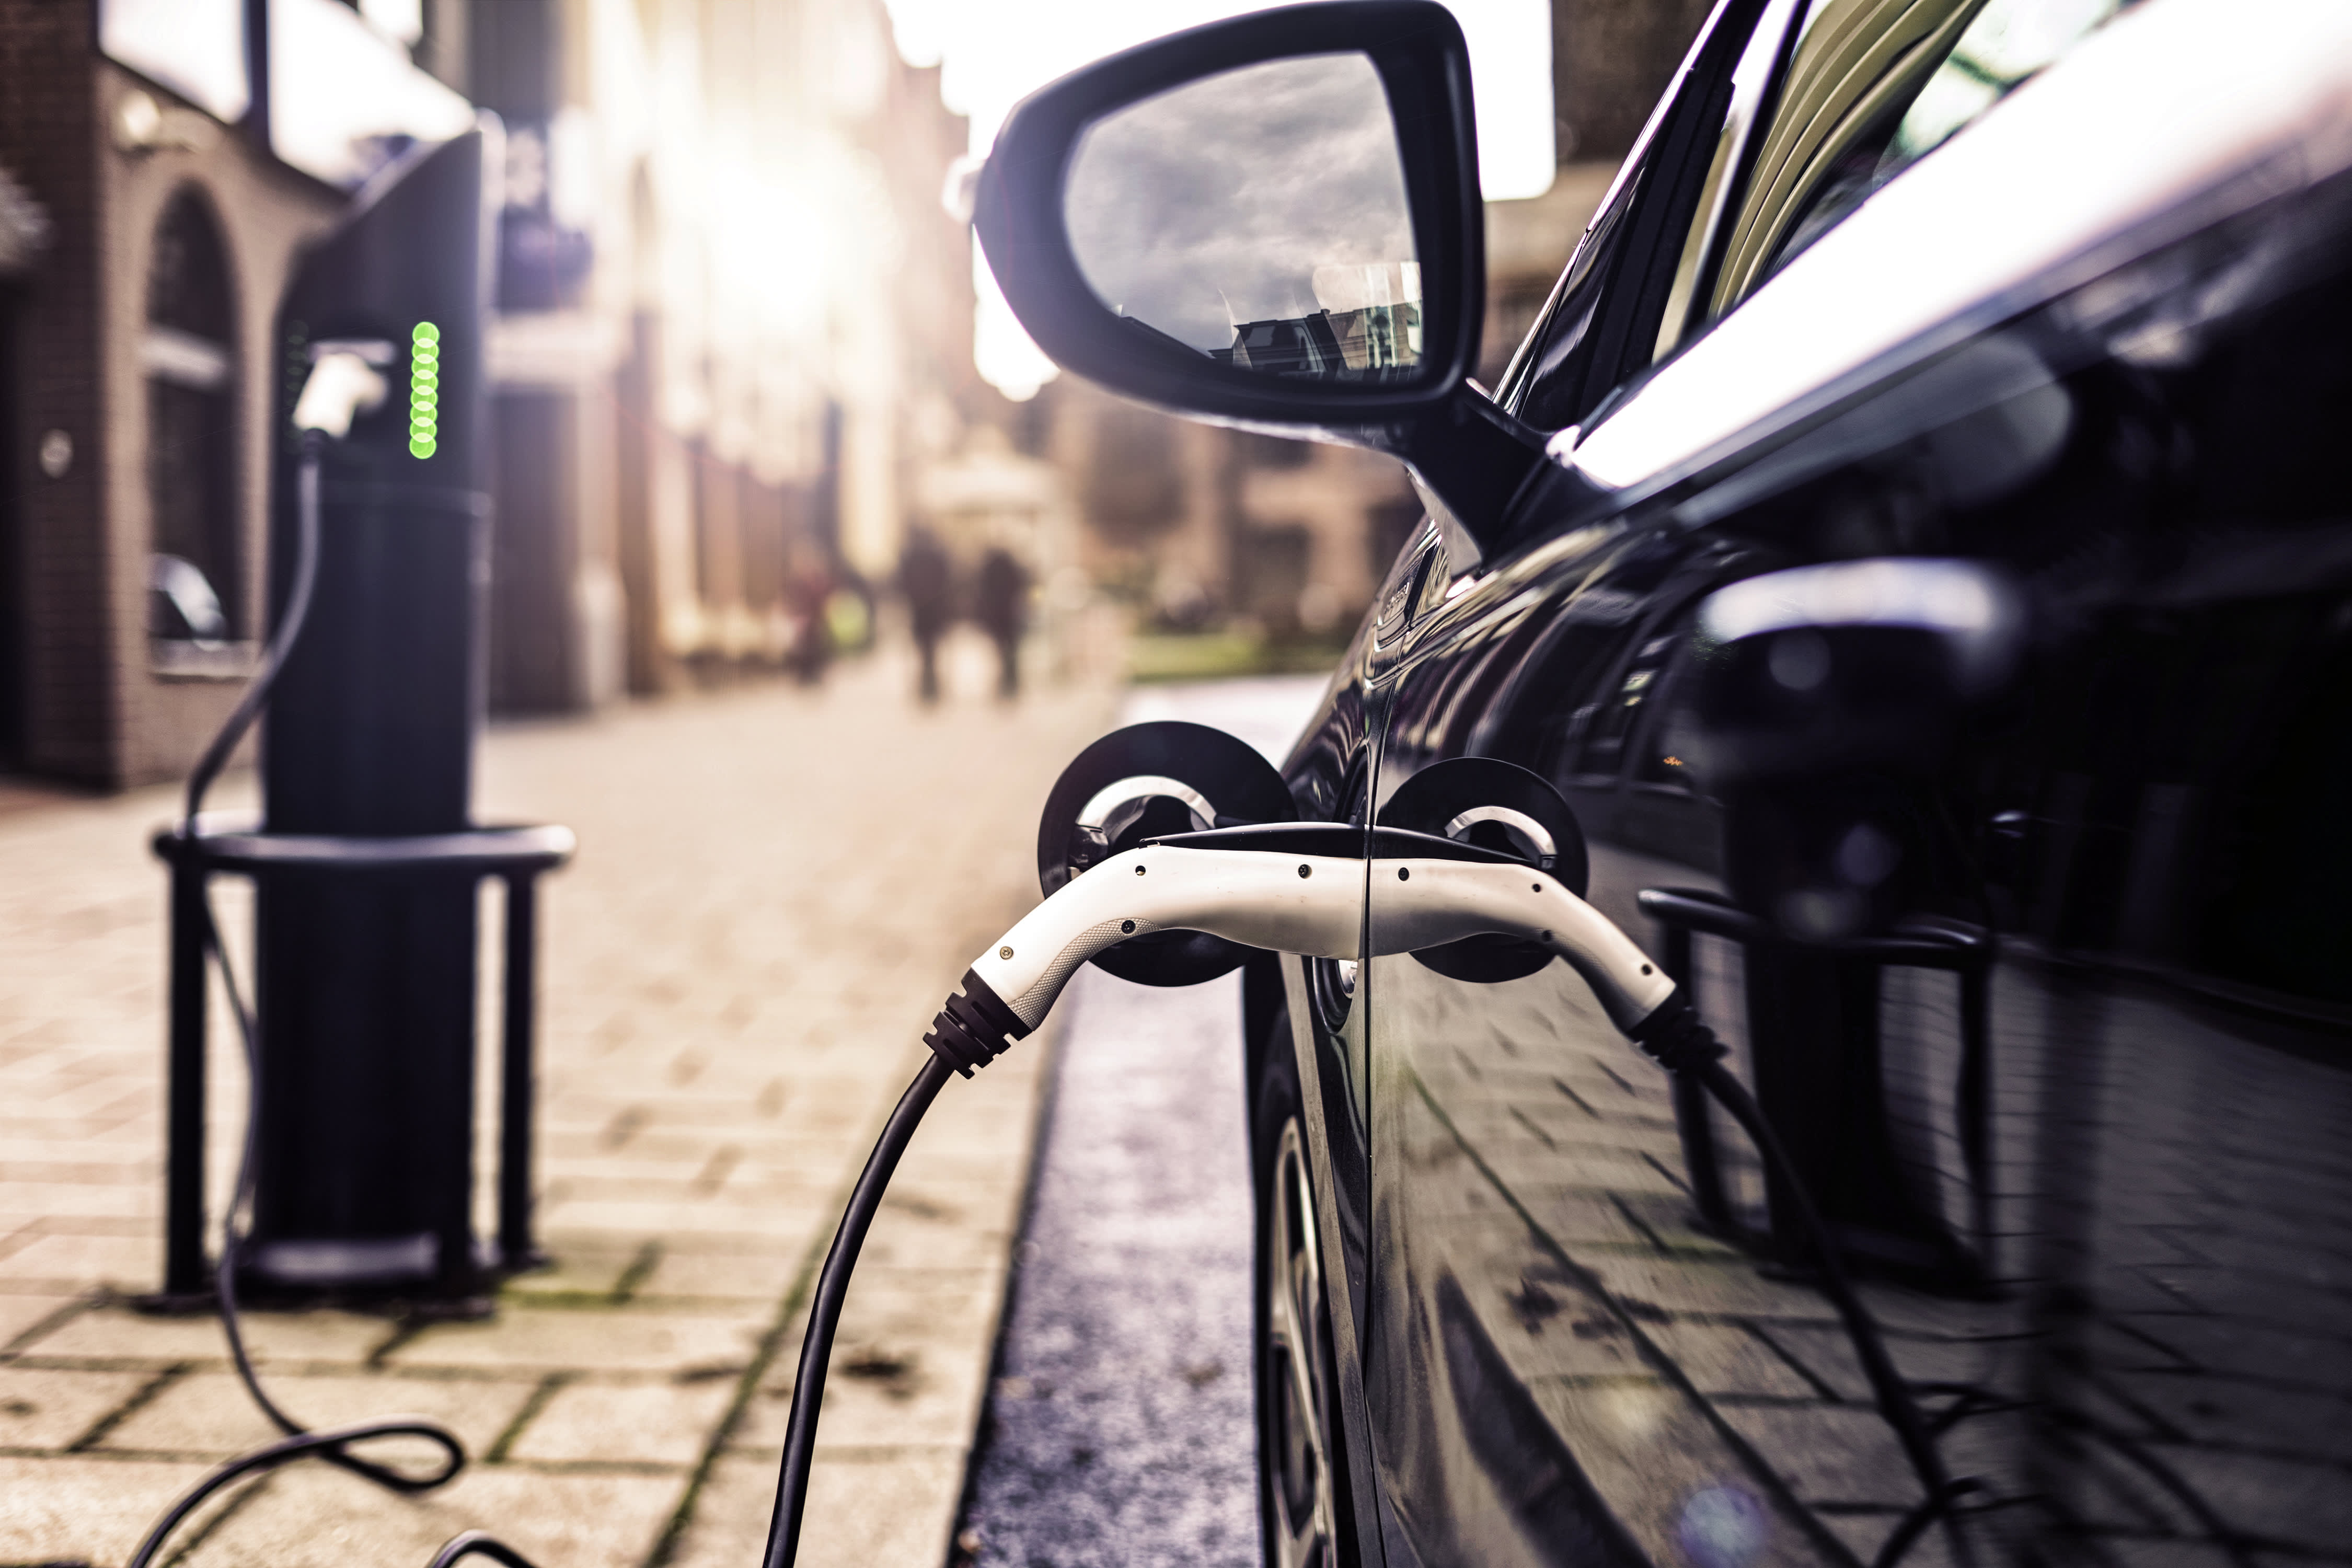 Buy this electric vehicle charging company poised to rally 120% as adoption grows, Credit Suisse says